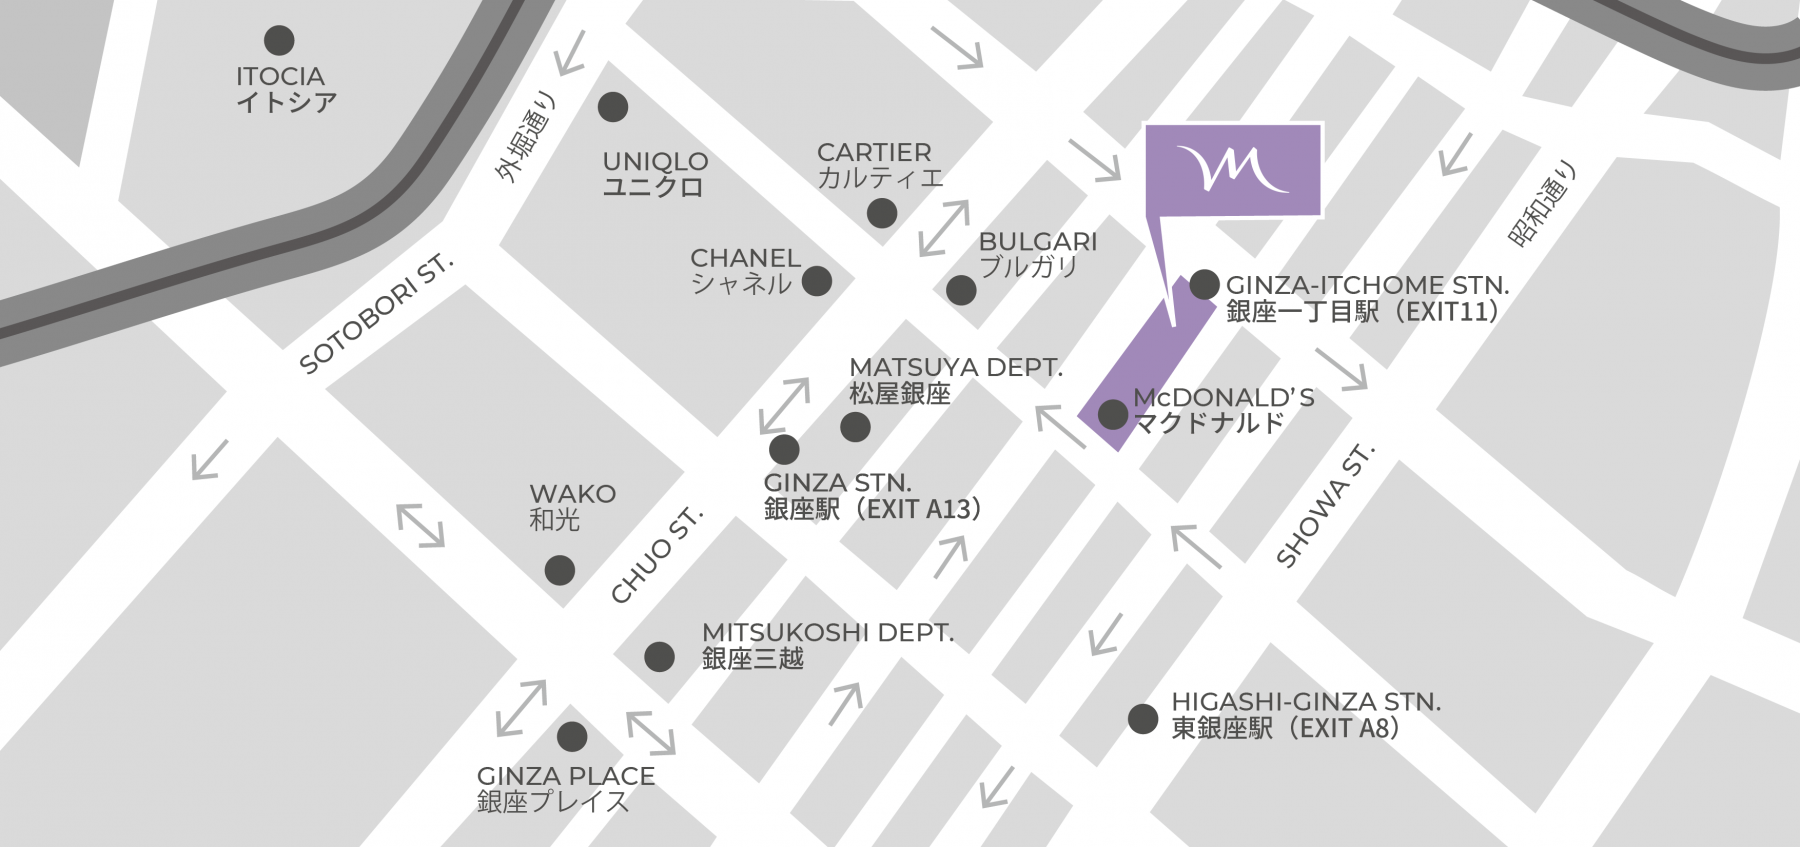 access hotel map